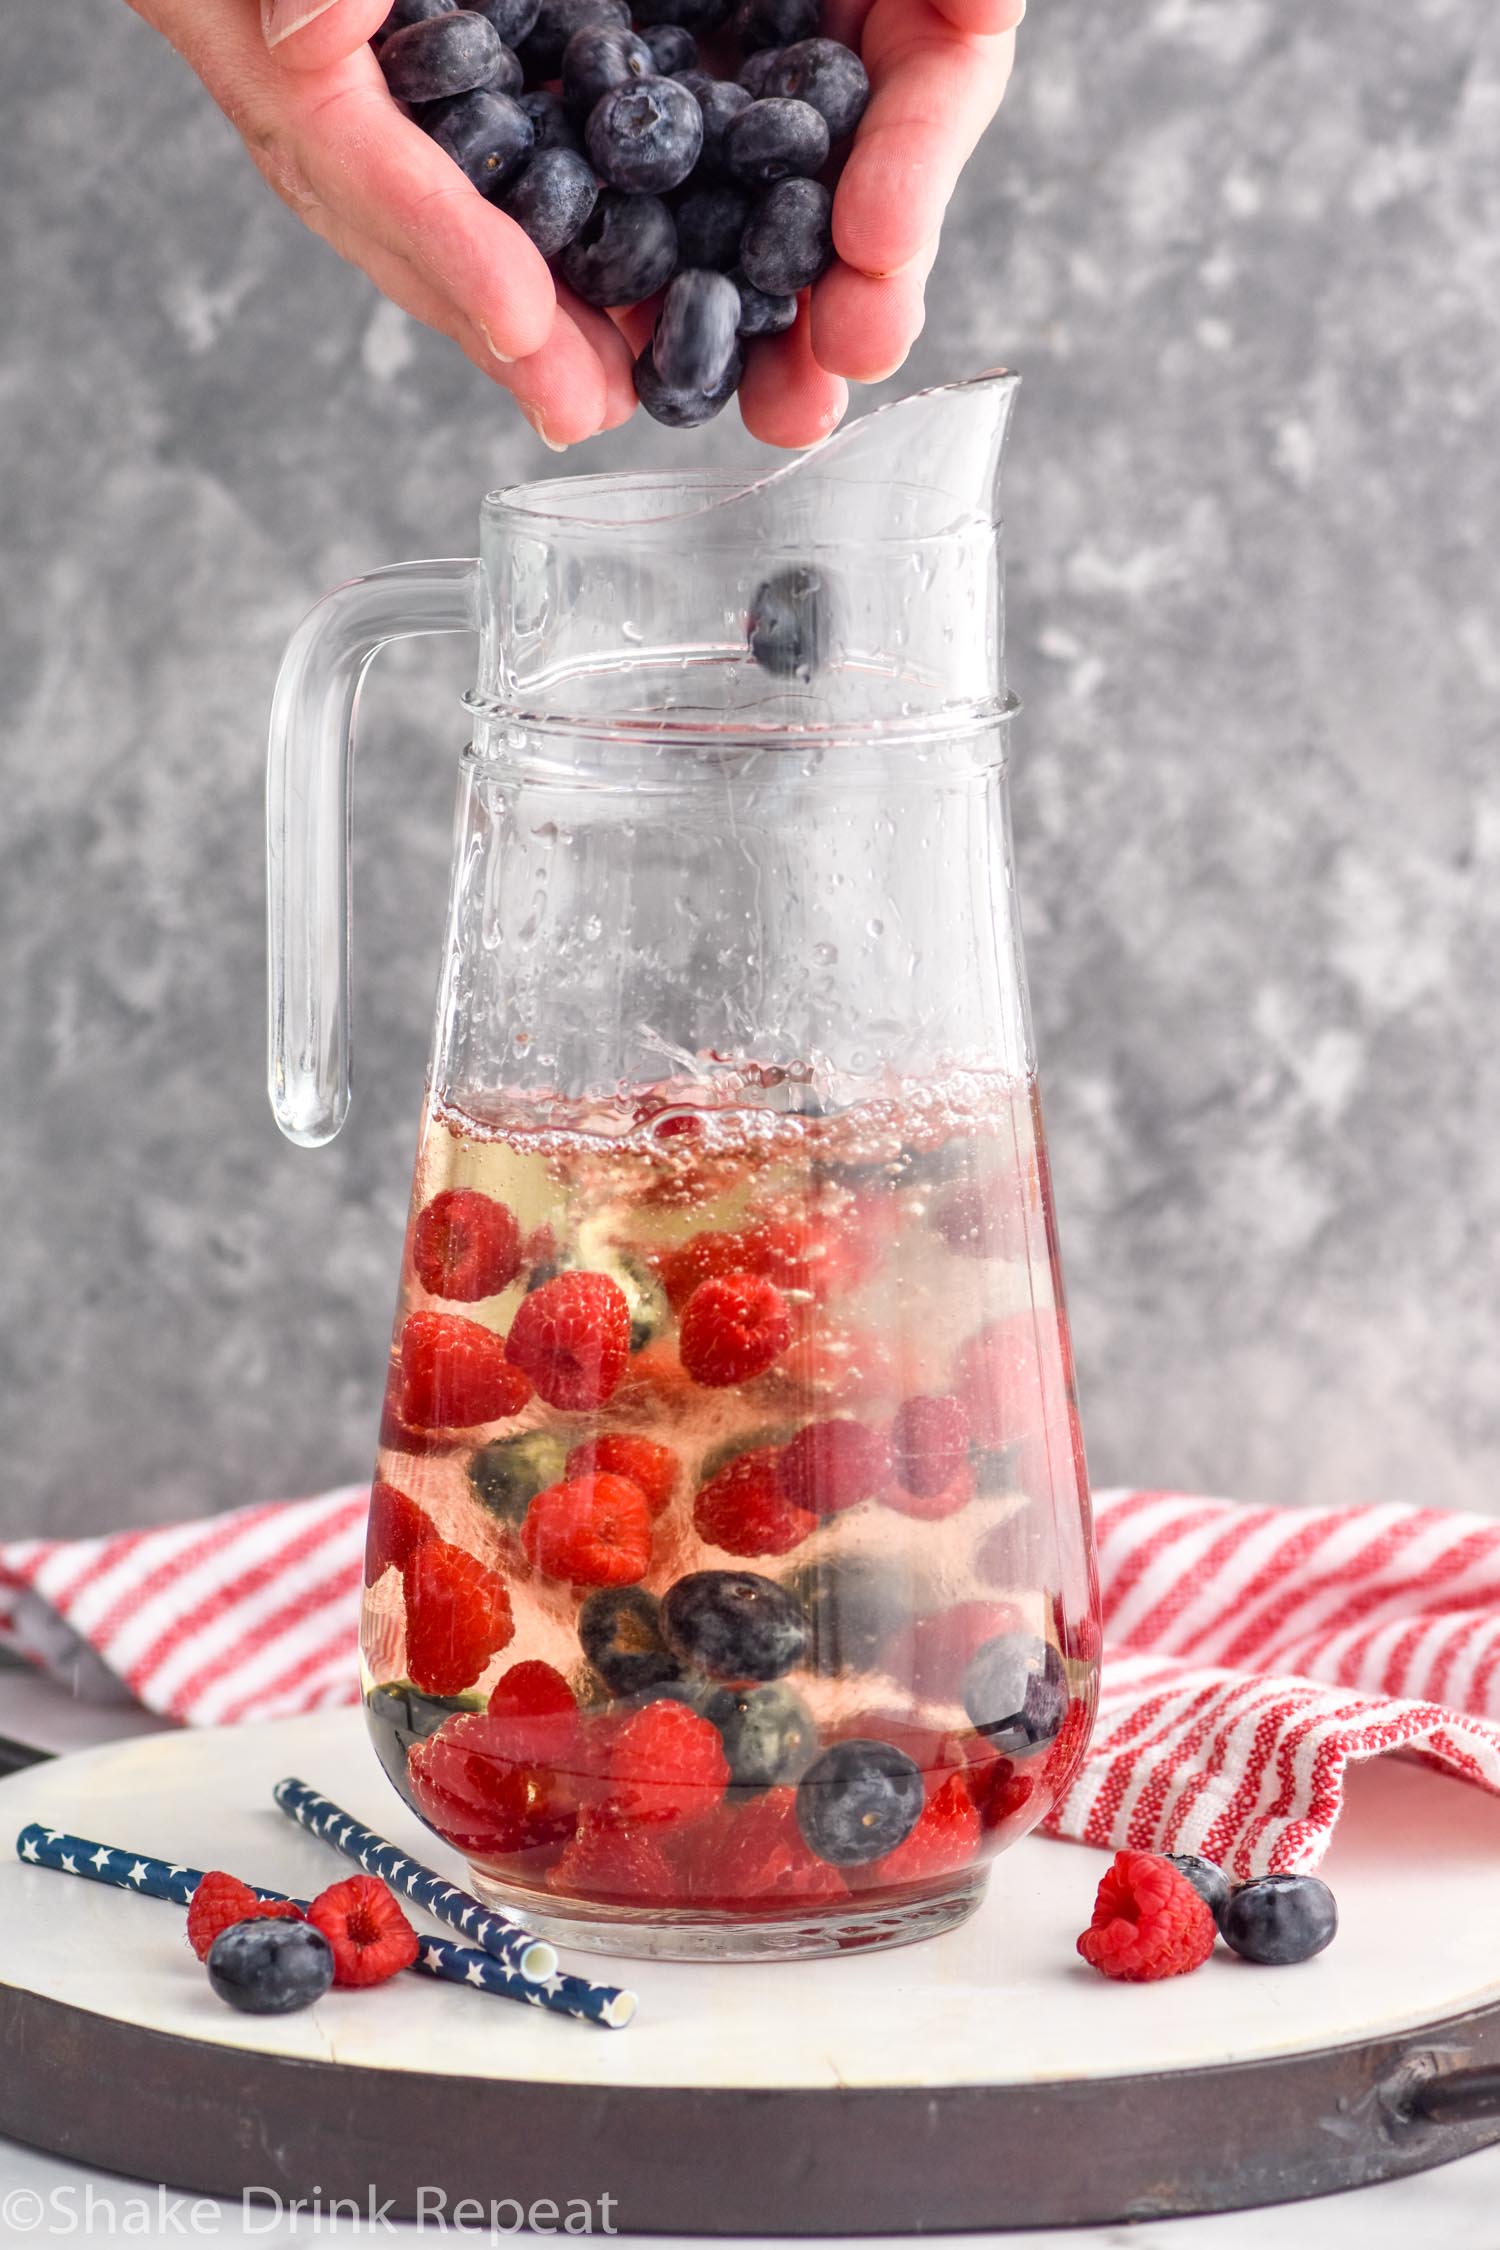 Side view of person's hand dropping blueberries into pitcher of Fourth of July Sangria recipe. Extra raspberries and blueberries beside pitcher.